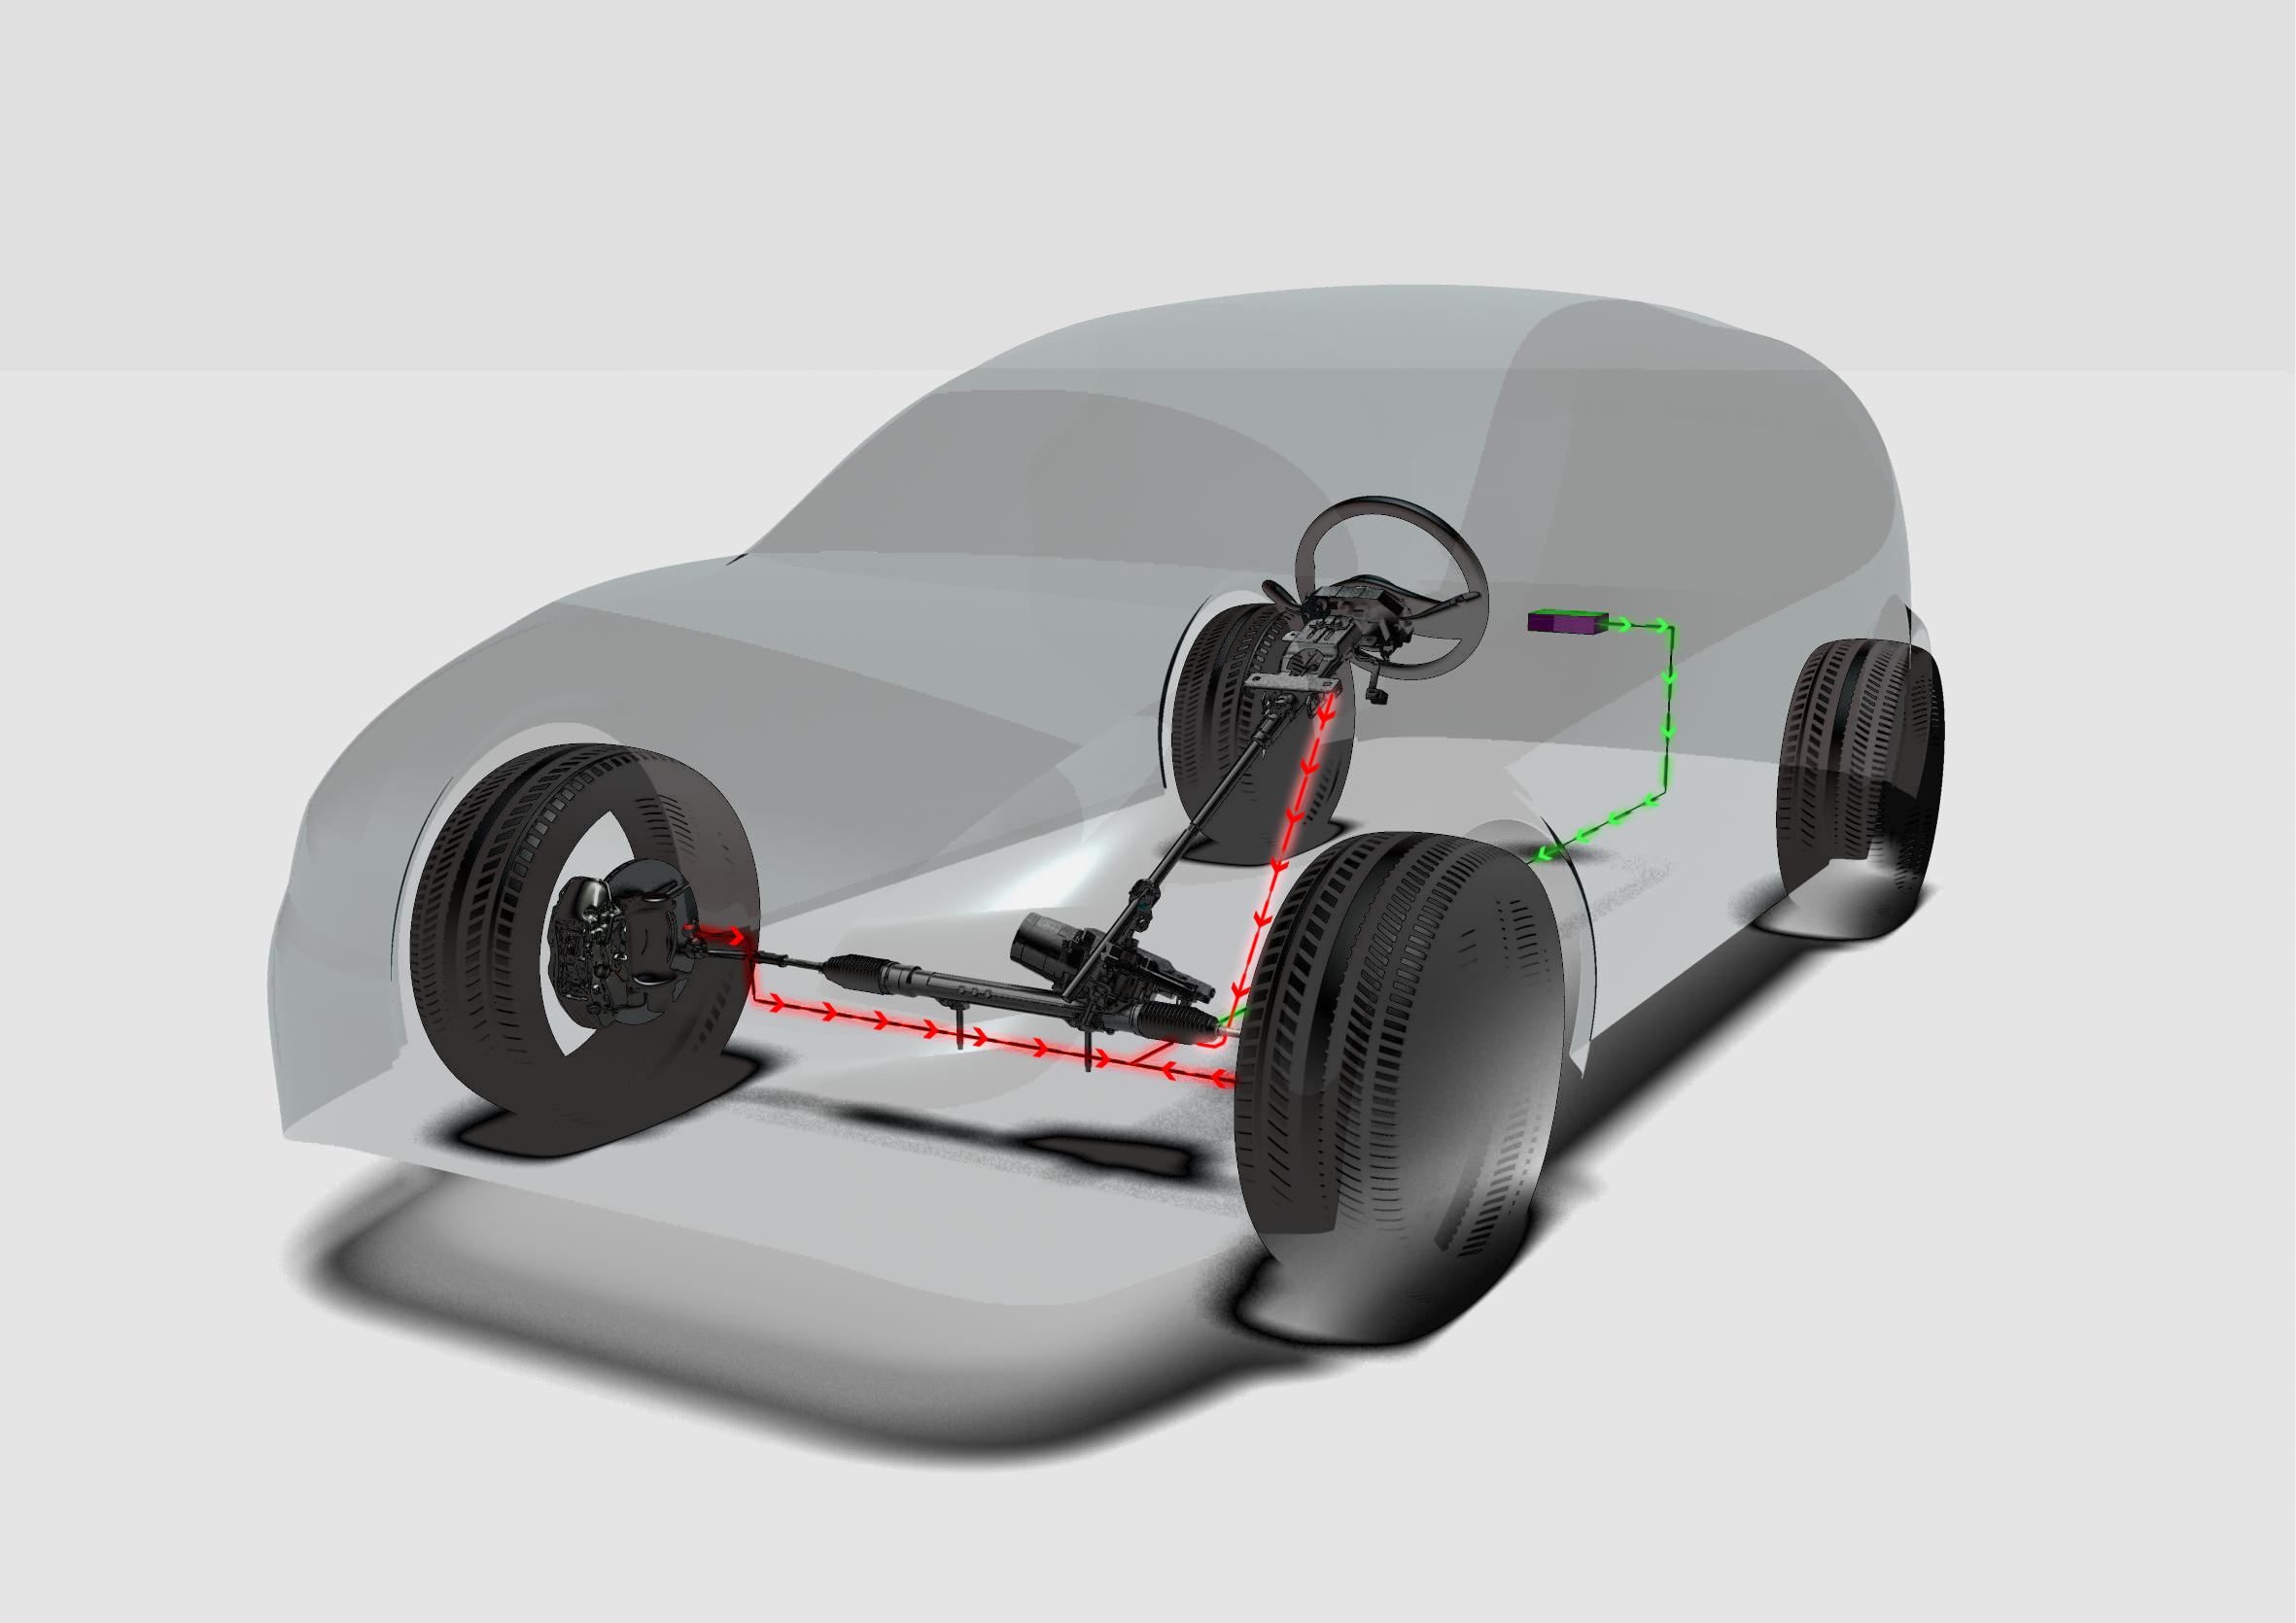 Nexteer Automotive A Leader in Intuitive Motion Control New